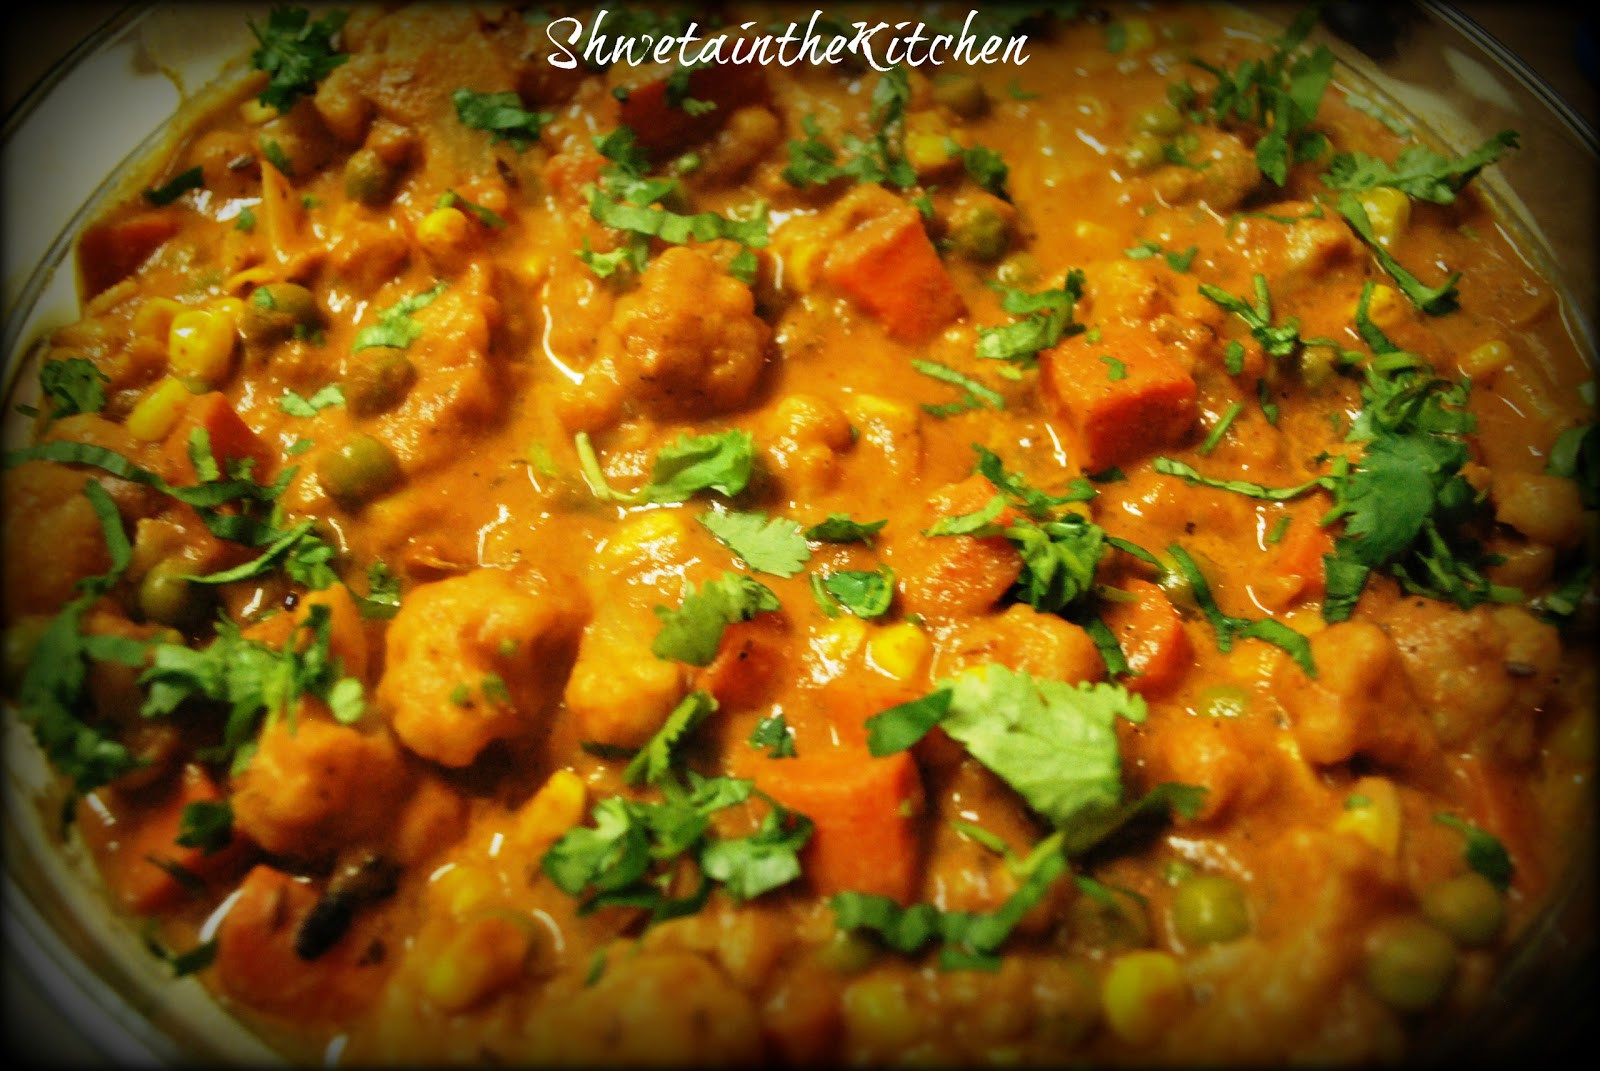 Indian Veg Curry Recipes
 Shweta in the Kitchen Mix Ve able Curry